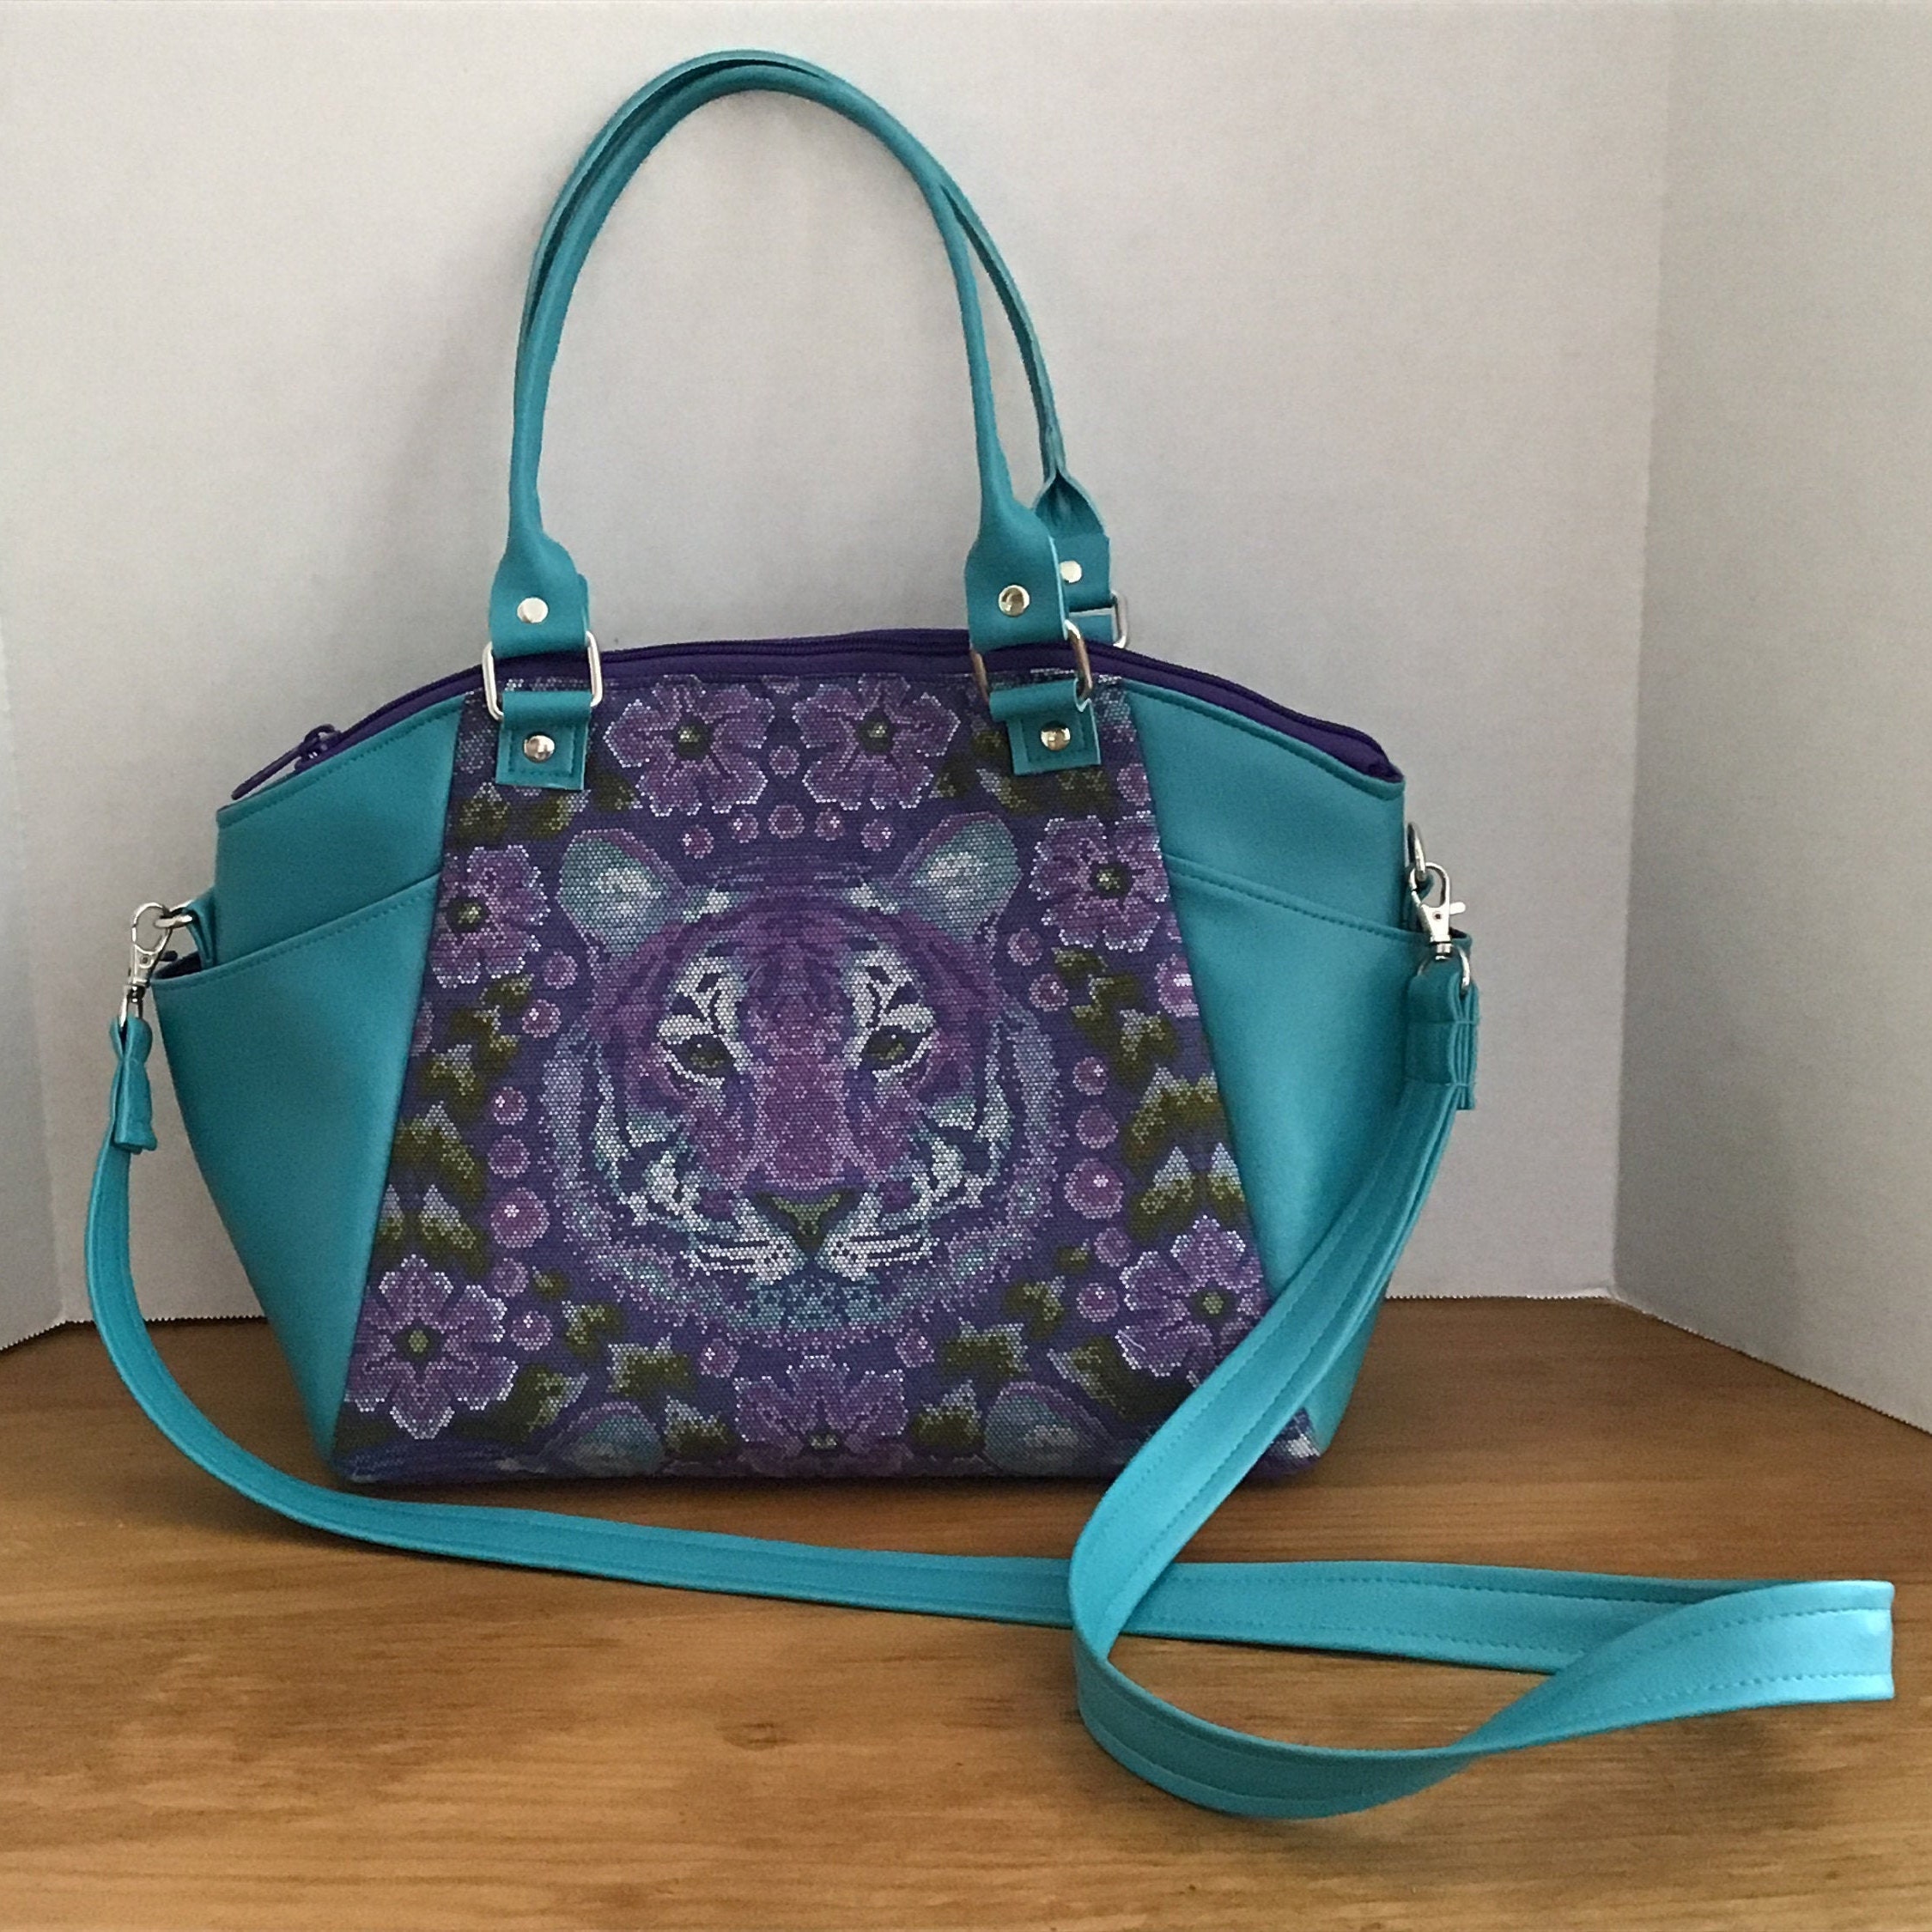 Crouching Tiger Print by Tulapink in This Colorful Handbag With Teal ...